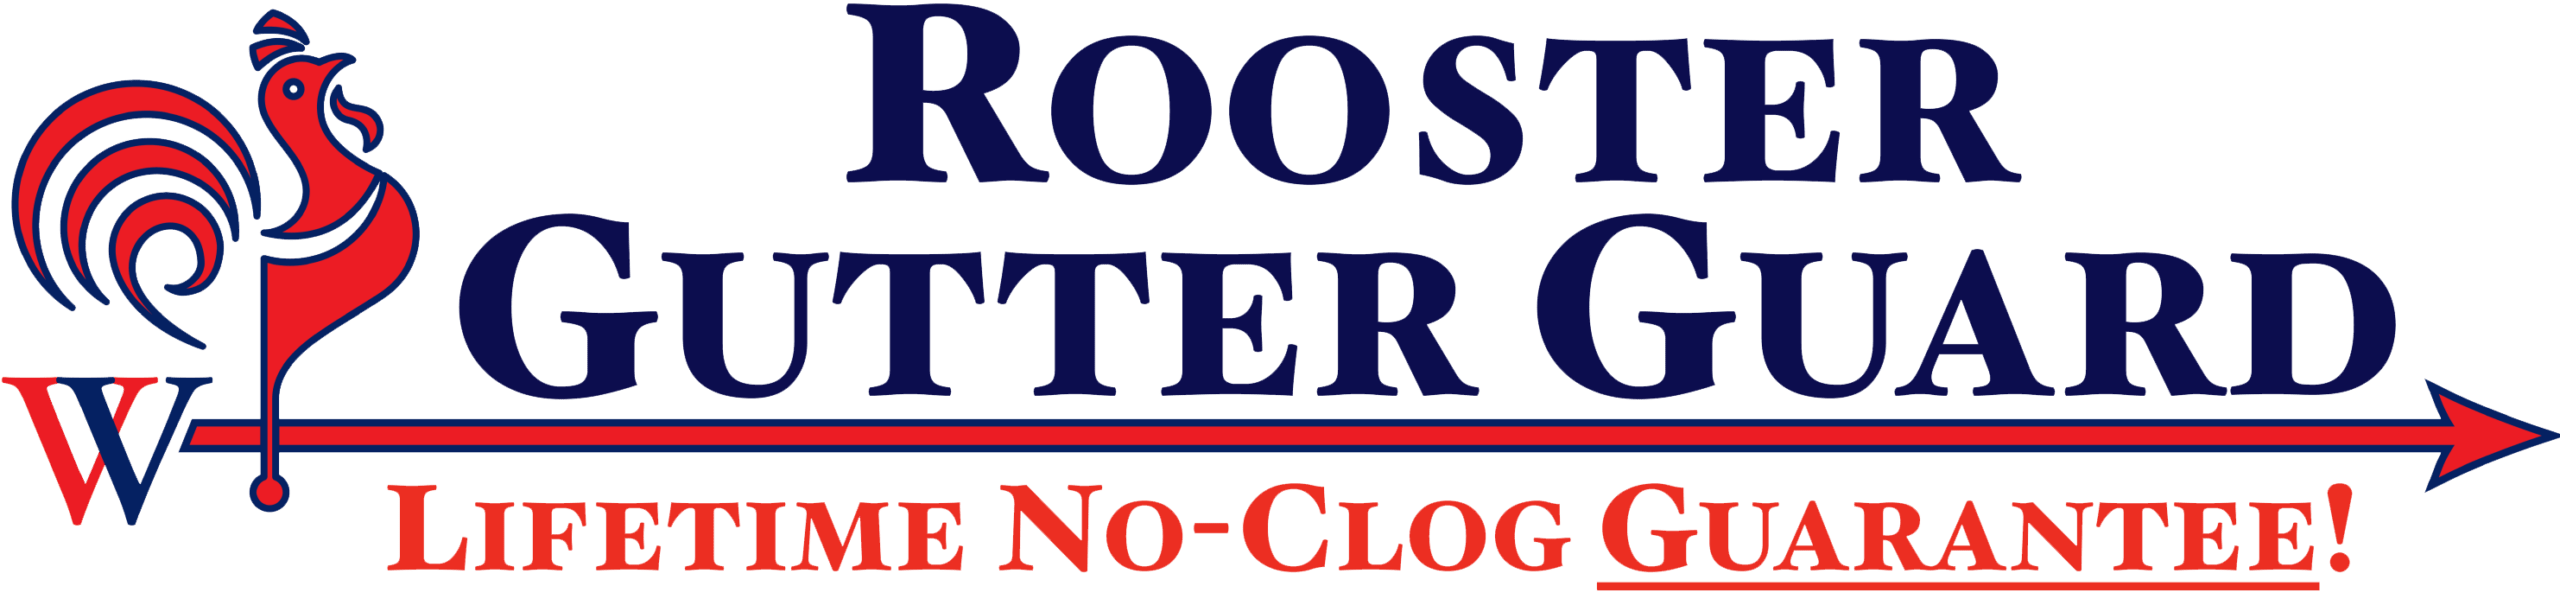 ROOSTER-GUARD